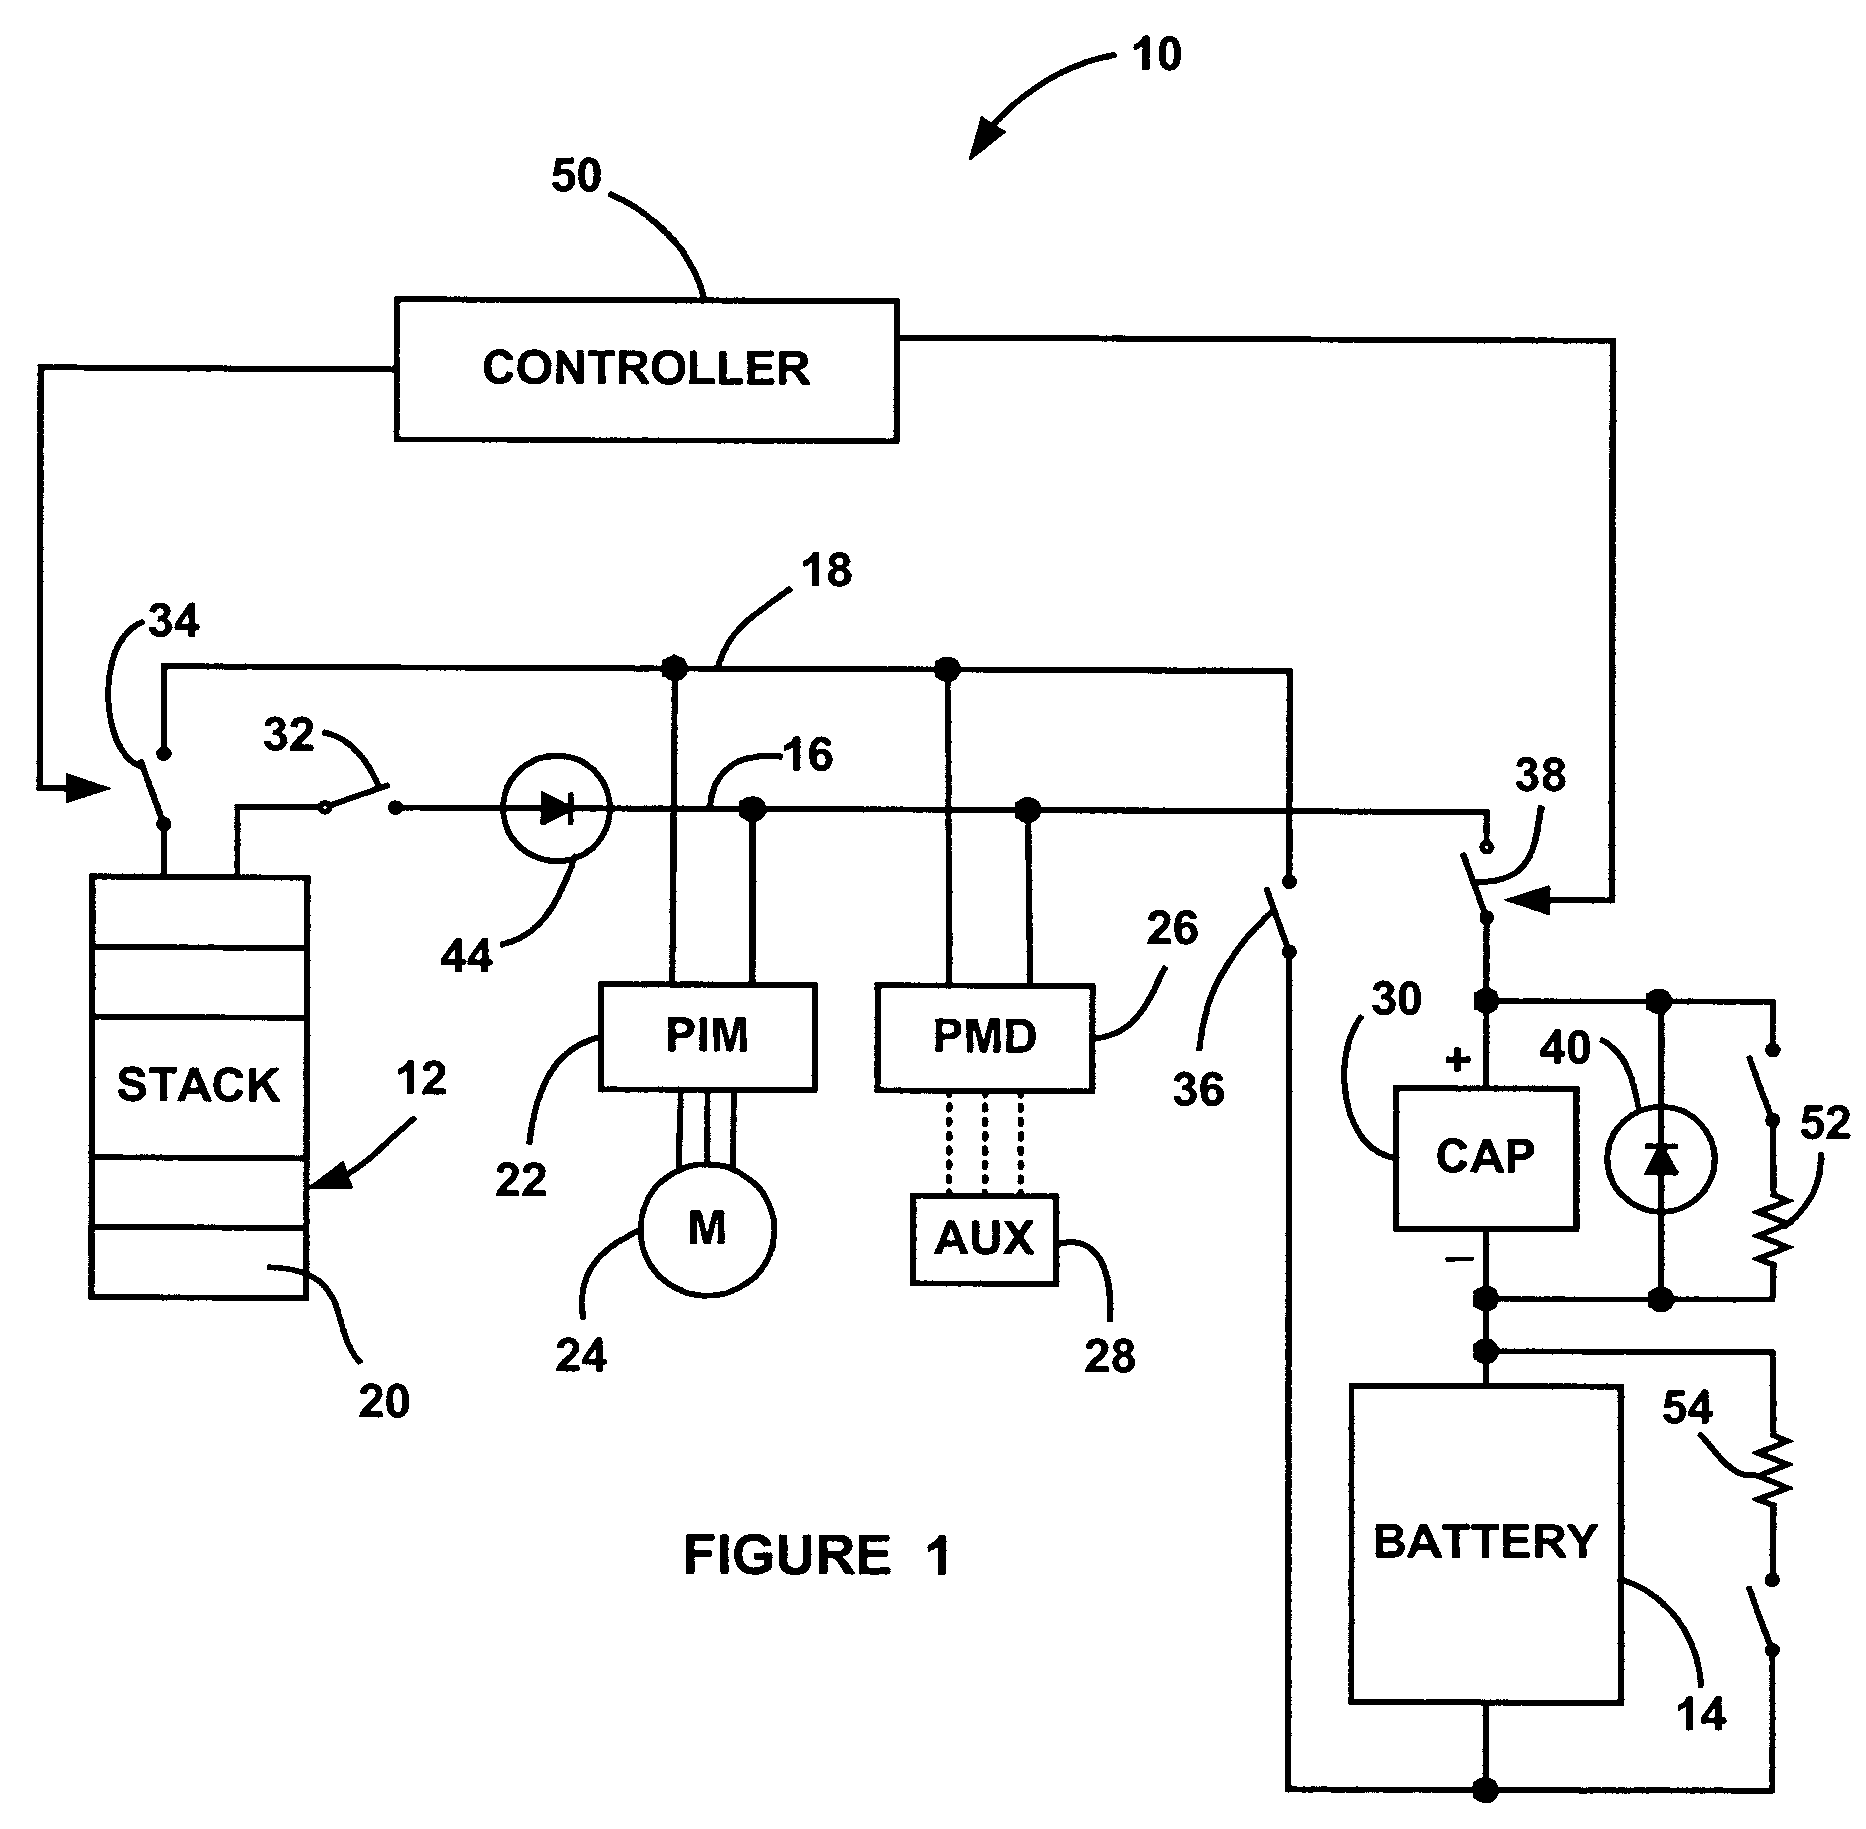 Hybrid fuel cell system with battery capacitor energy storage system